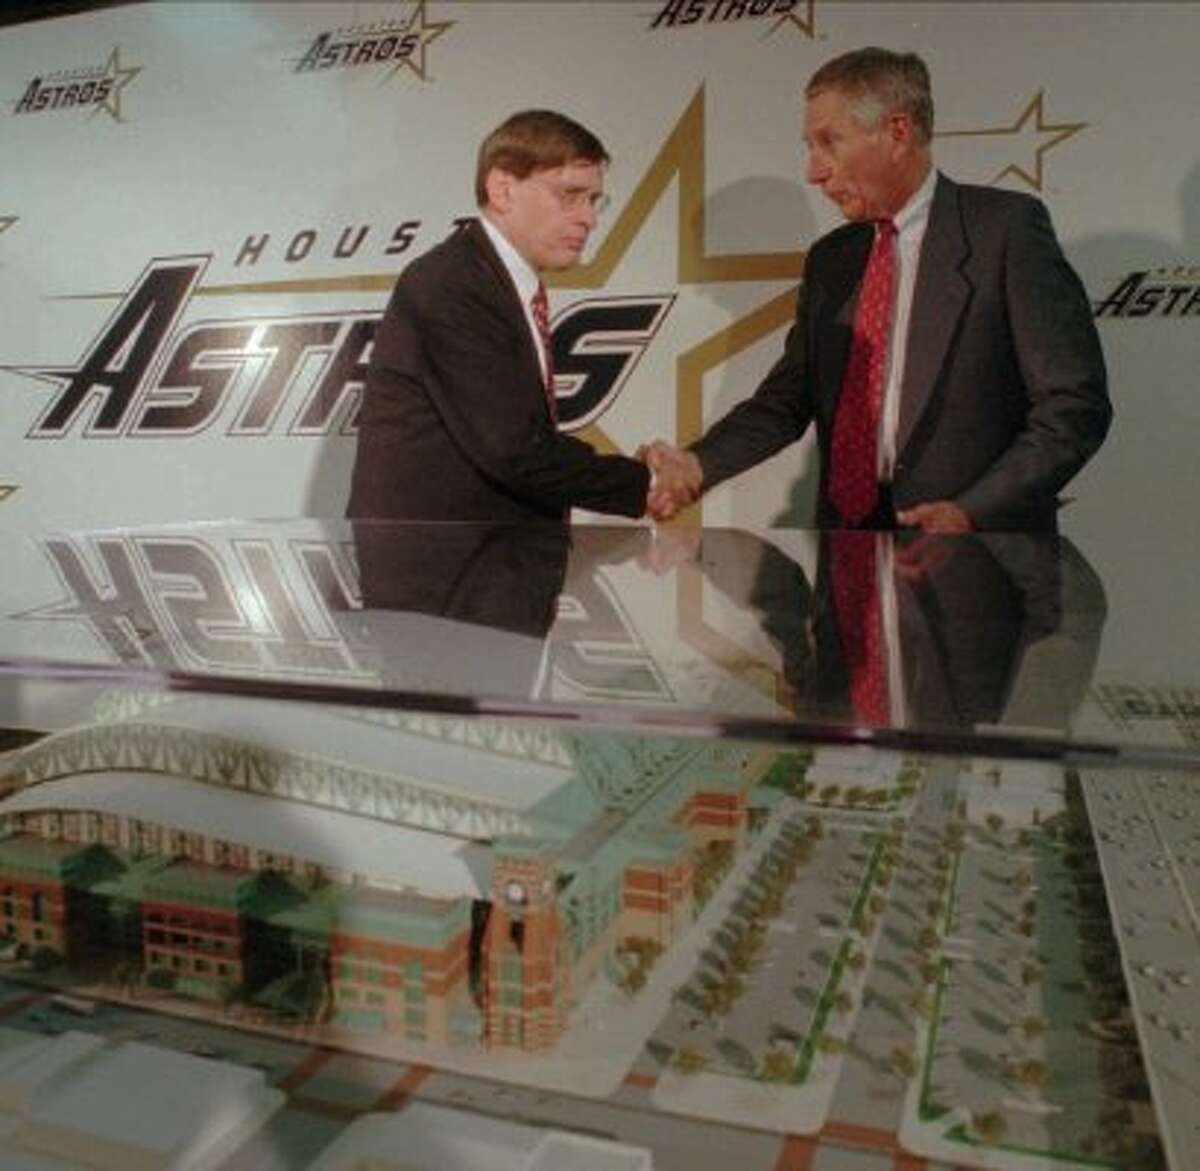 In 1998, Enron had made it. The company that formed from the merger between Houston Natural Gas and InterNorth was set to have its name plastered on the brand new Astros stadium. Enron Field was scheduled to open in 2000 with a 30-year lease agreement. That same year, Andrew Fastow was named the chief financial officer for Enron. (DAVID J. PHILLIP / AP)